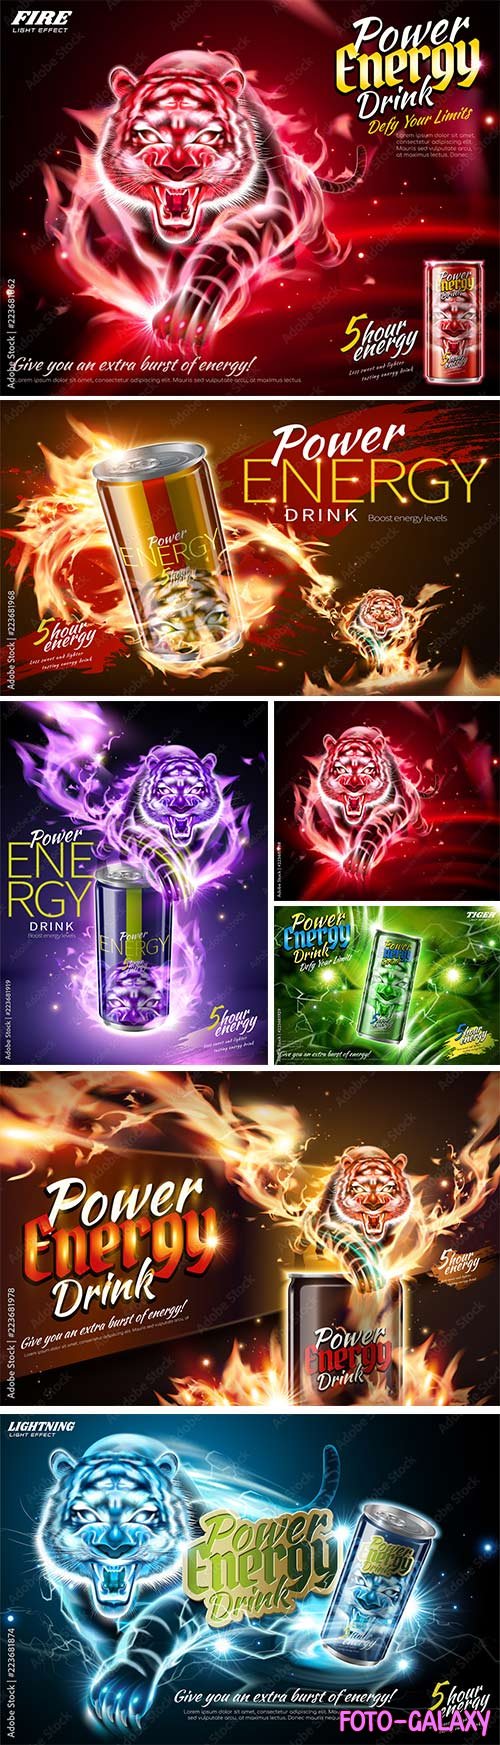 Tiger with red burning flame, power energy drink ads vector